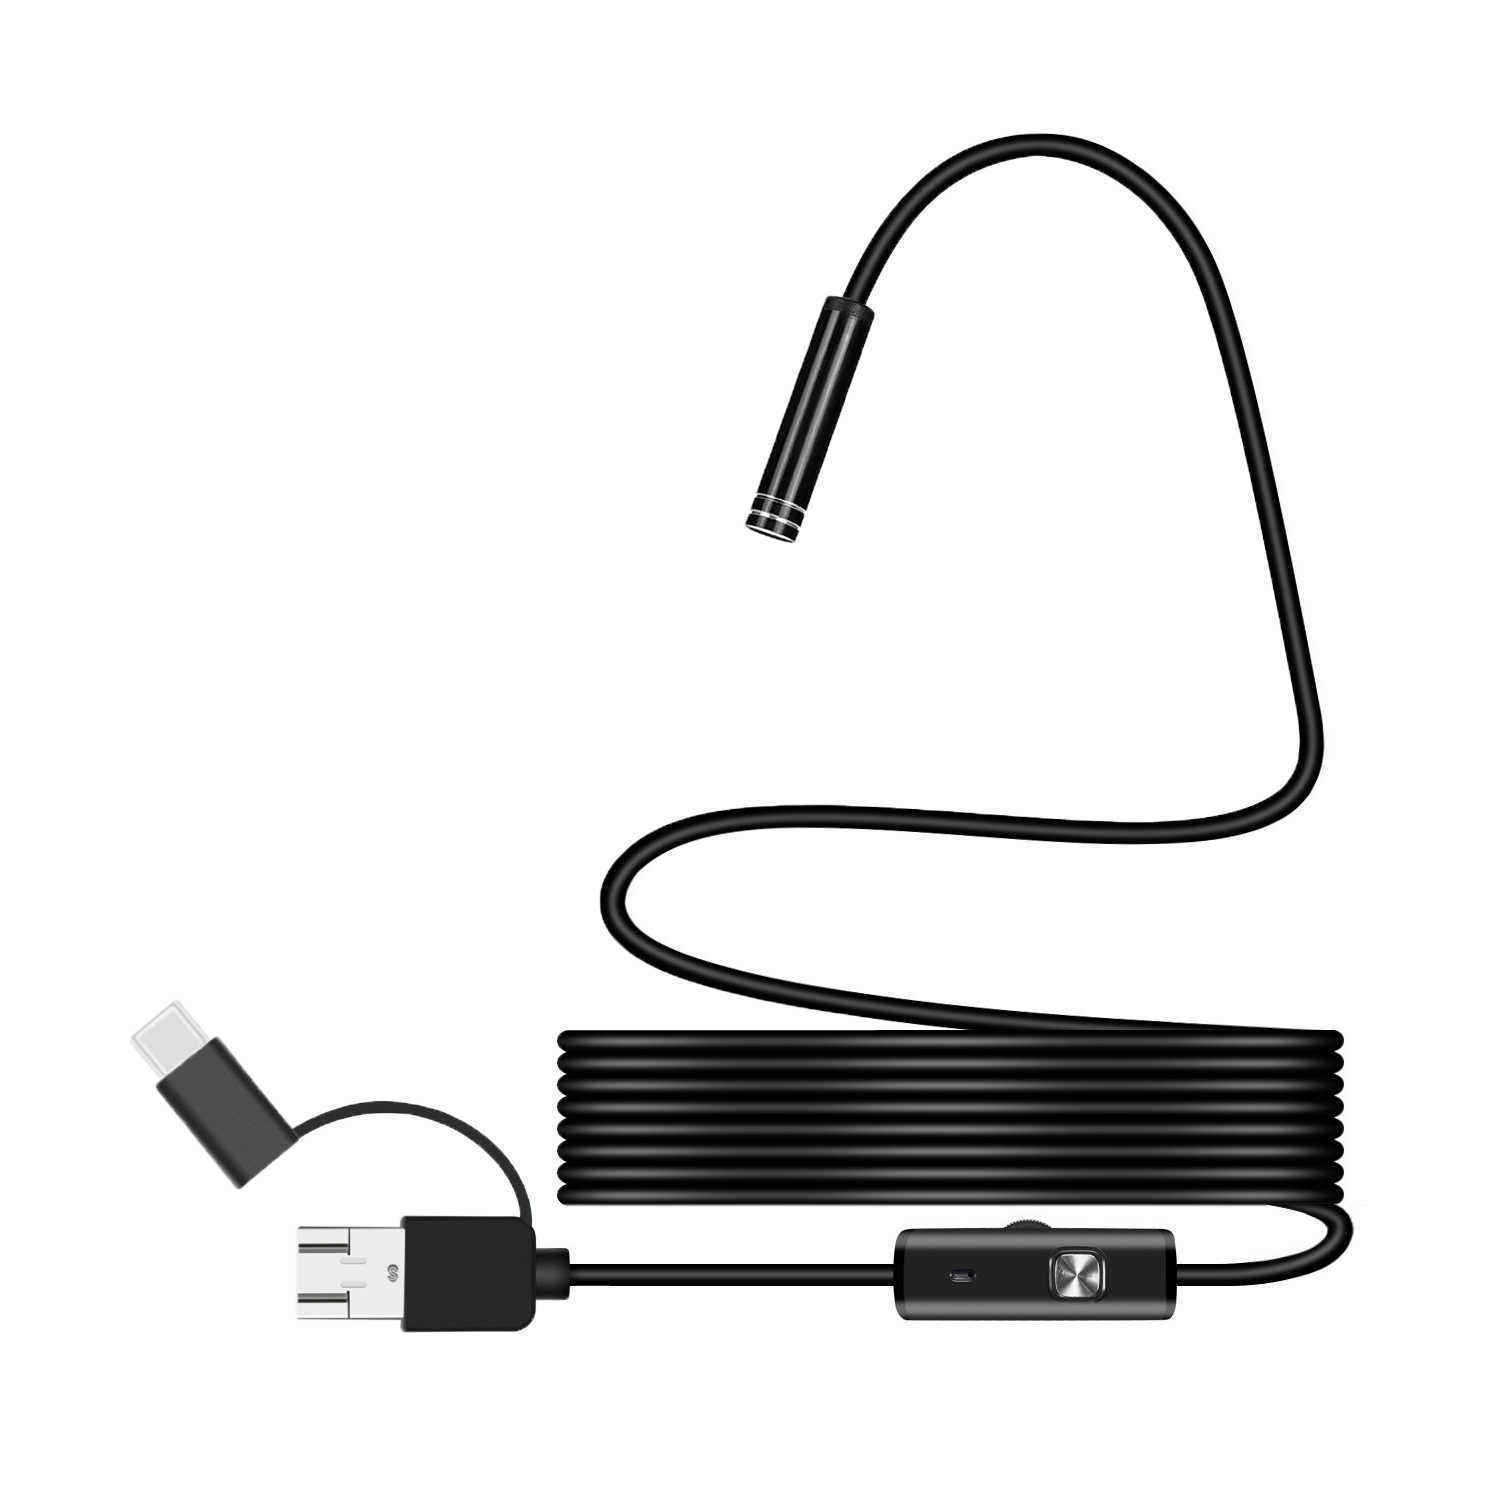 Bakeey-3-in-1-7mm-6Led-Type-C-Micro-USB-Endoscope-Inspection-Camera-Soft-Cable-for-Android-PC-1193589